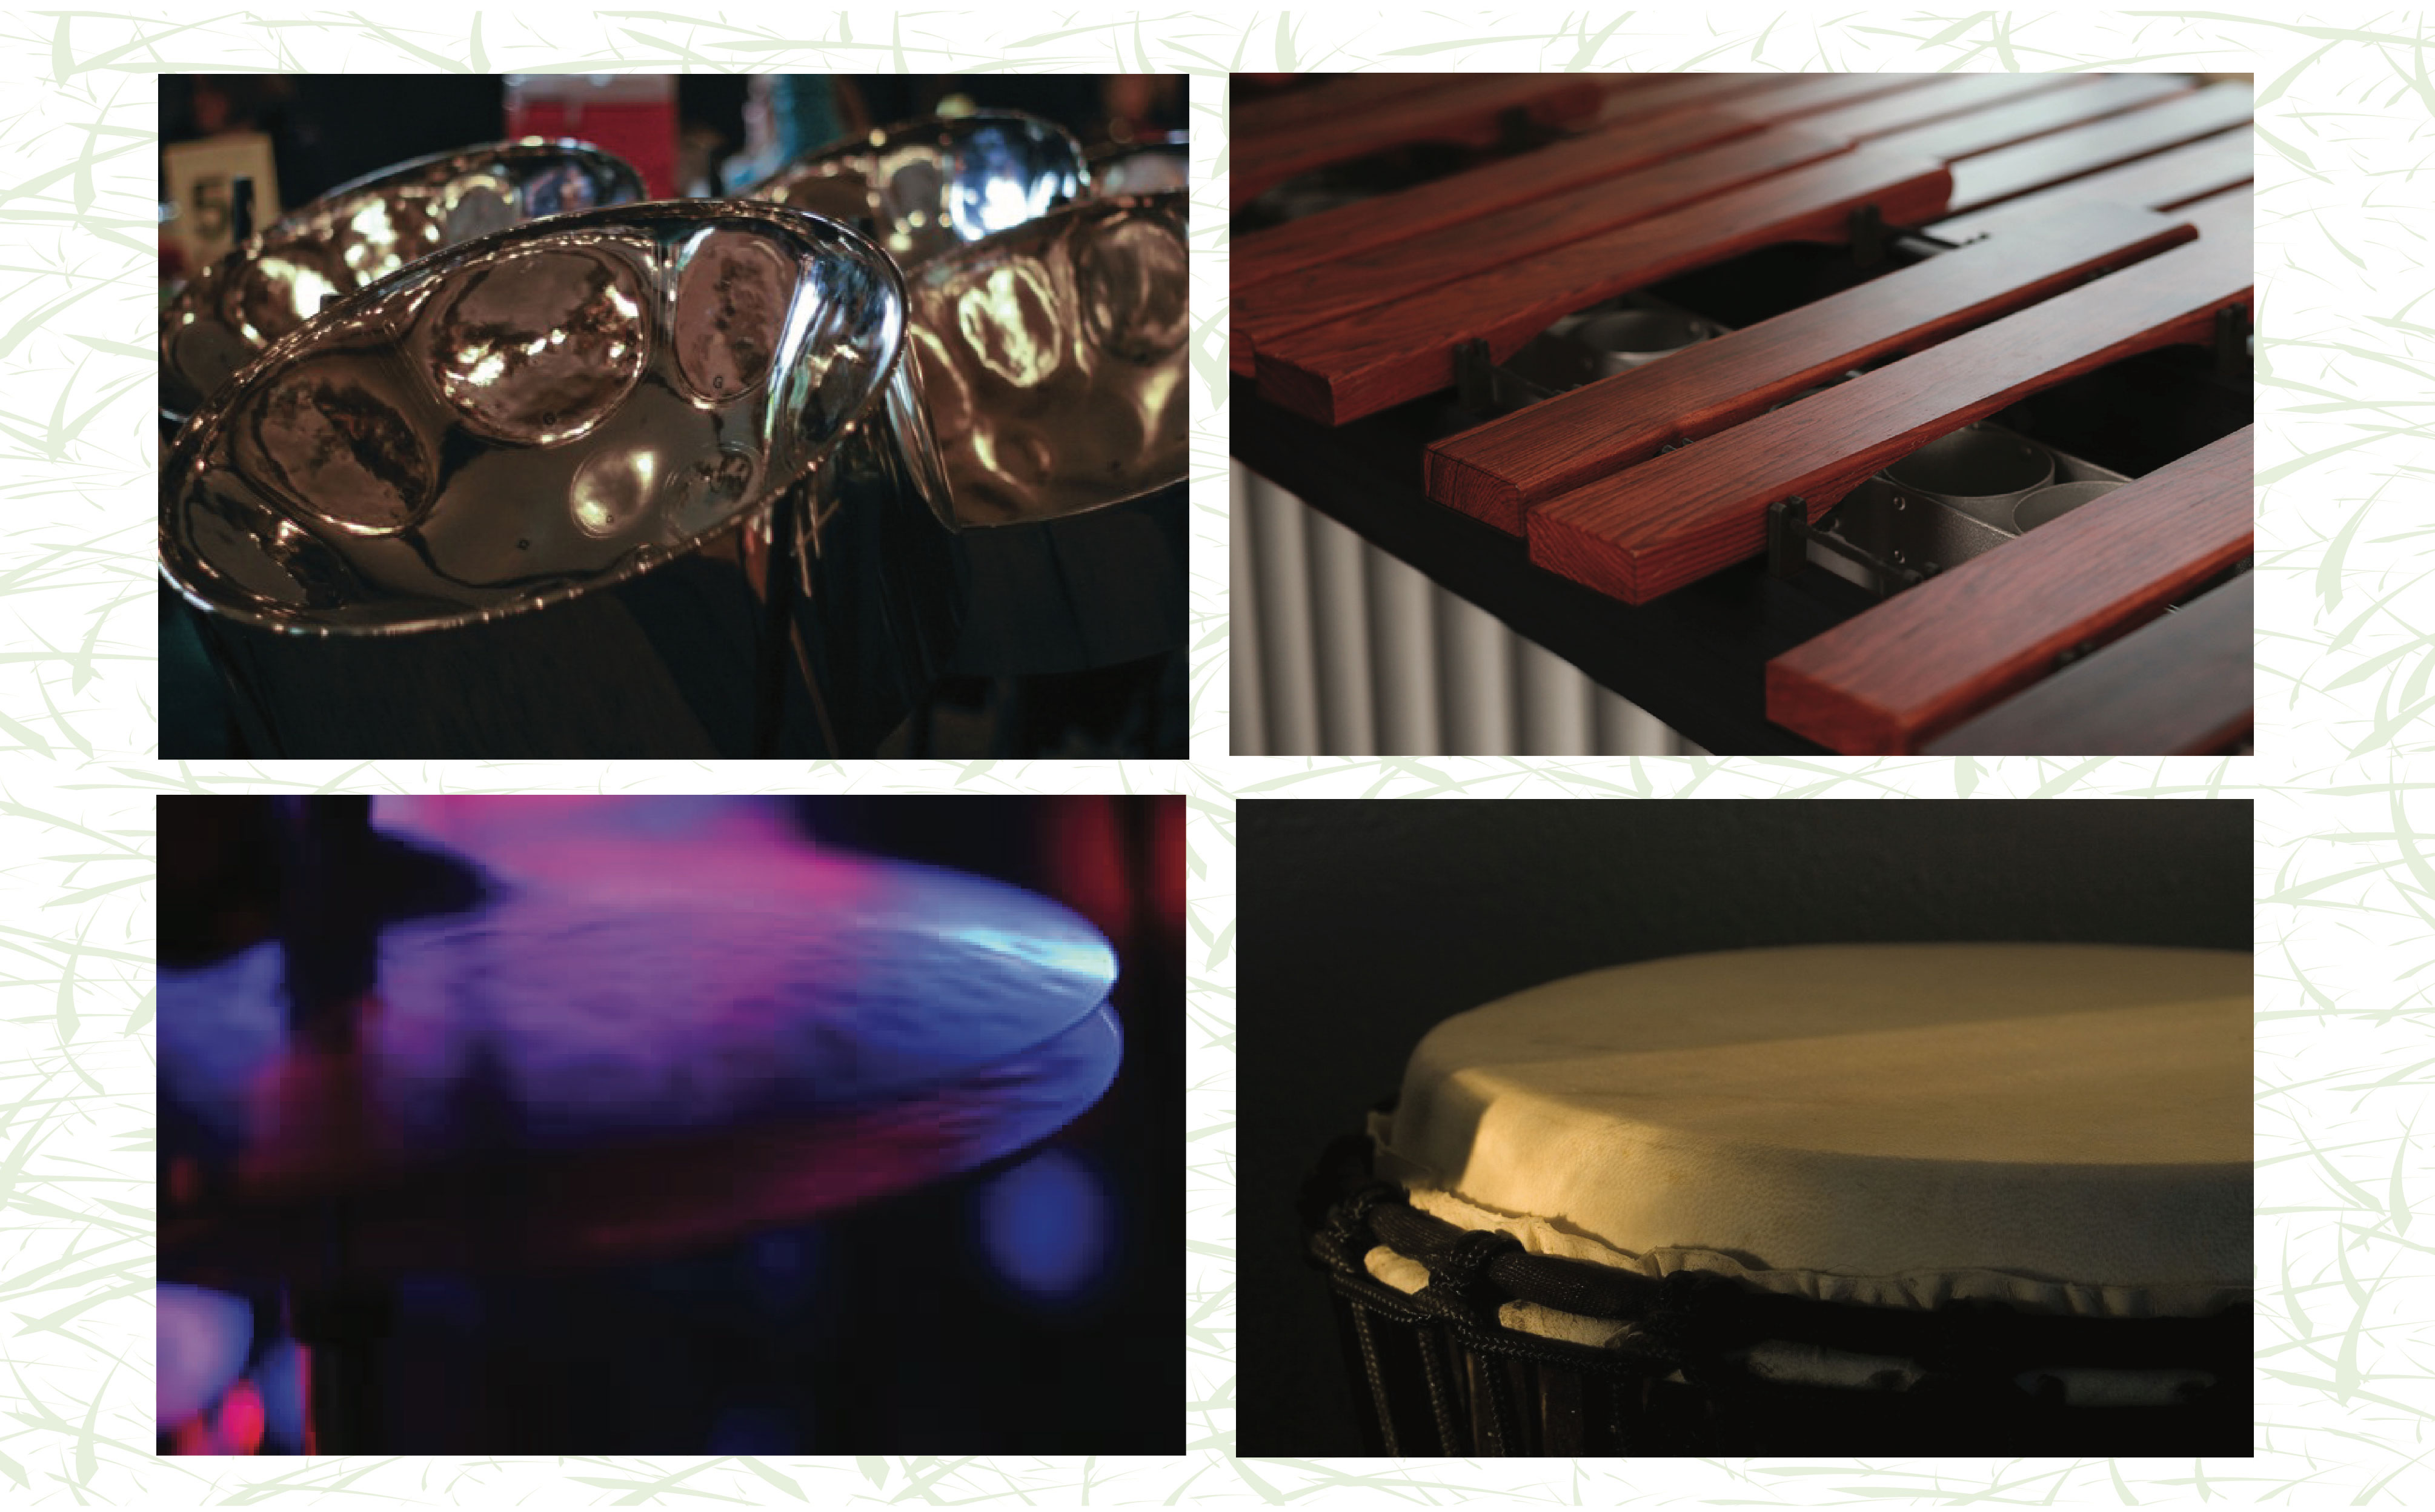 Stock photos of percussion instruments